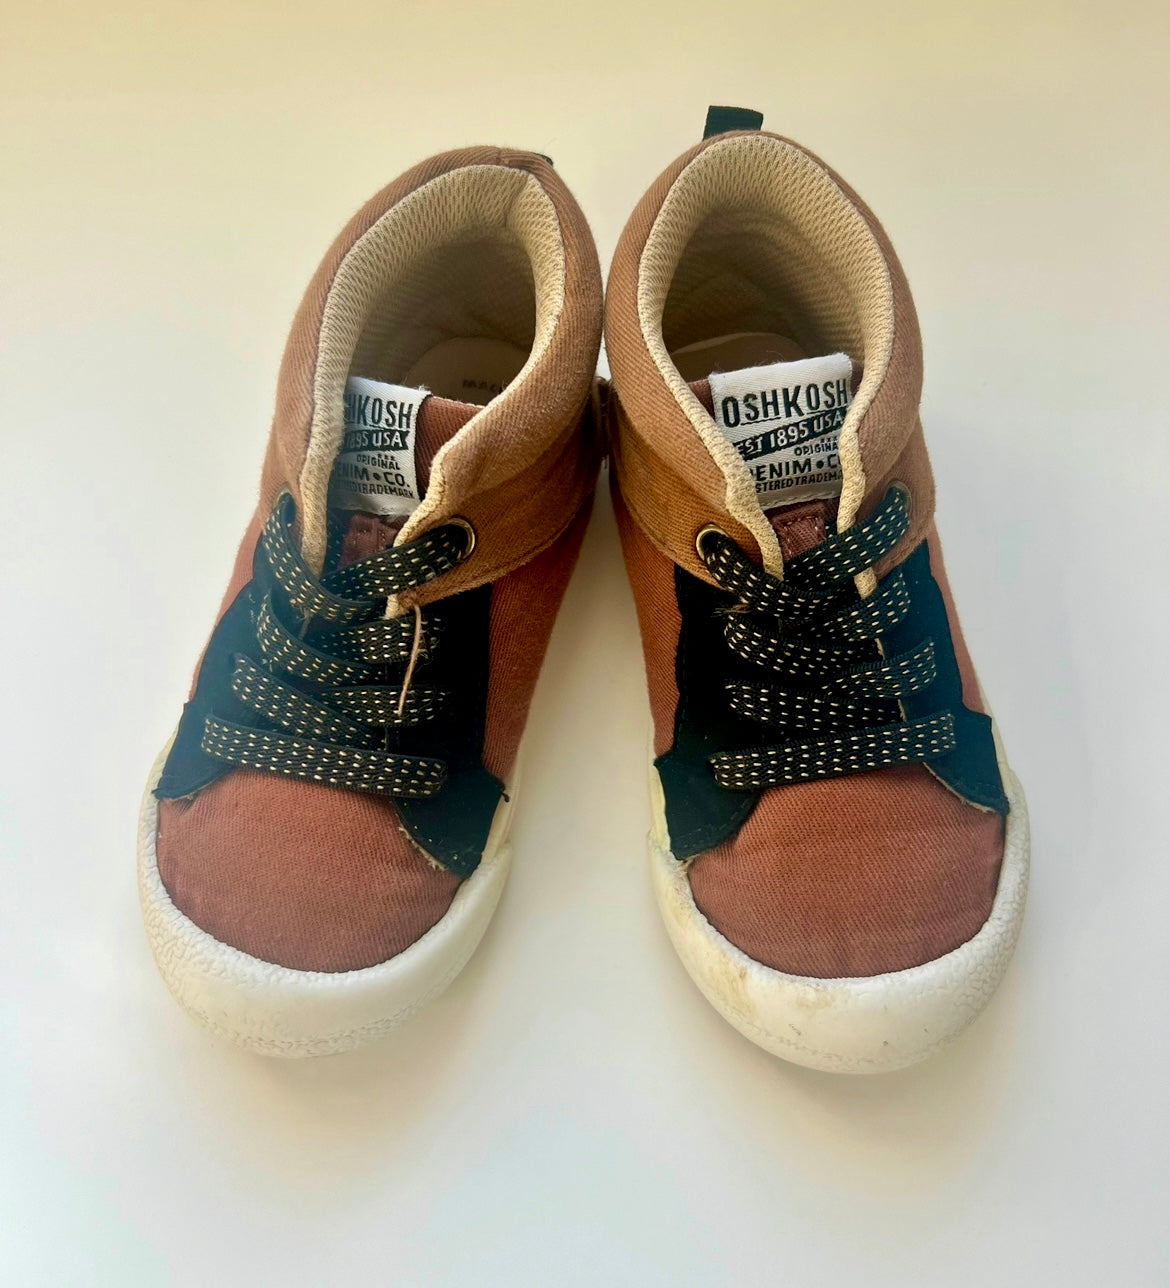 Toddler Size 10 Osh Kosh High Top Sneakers